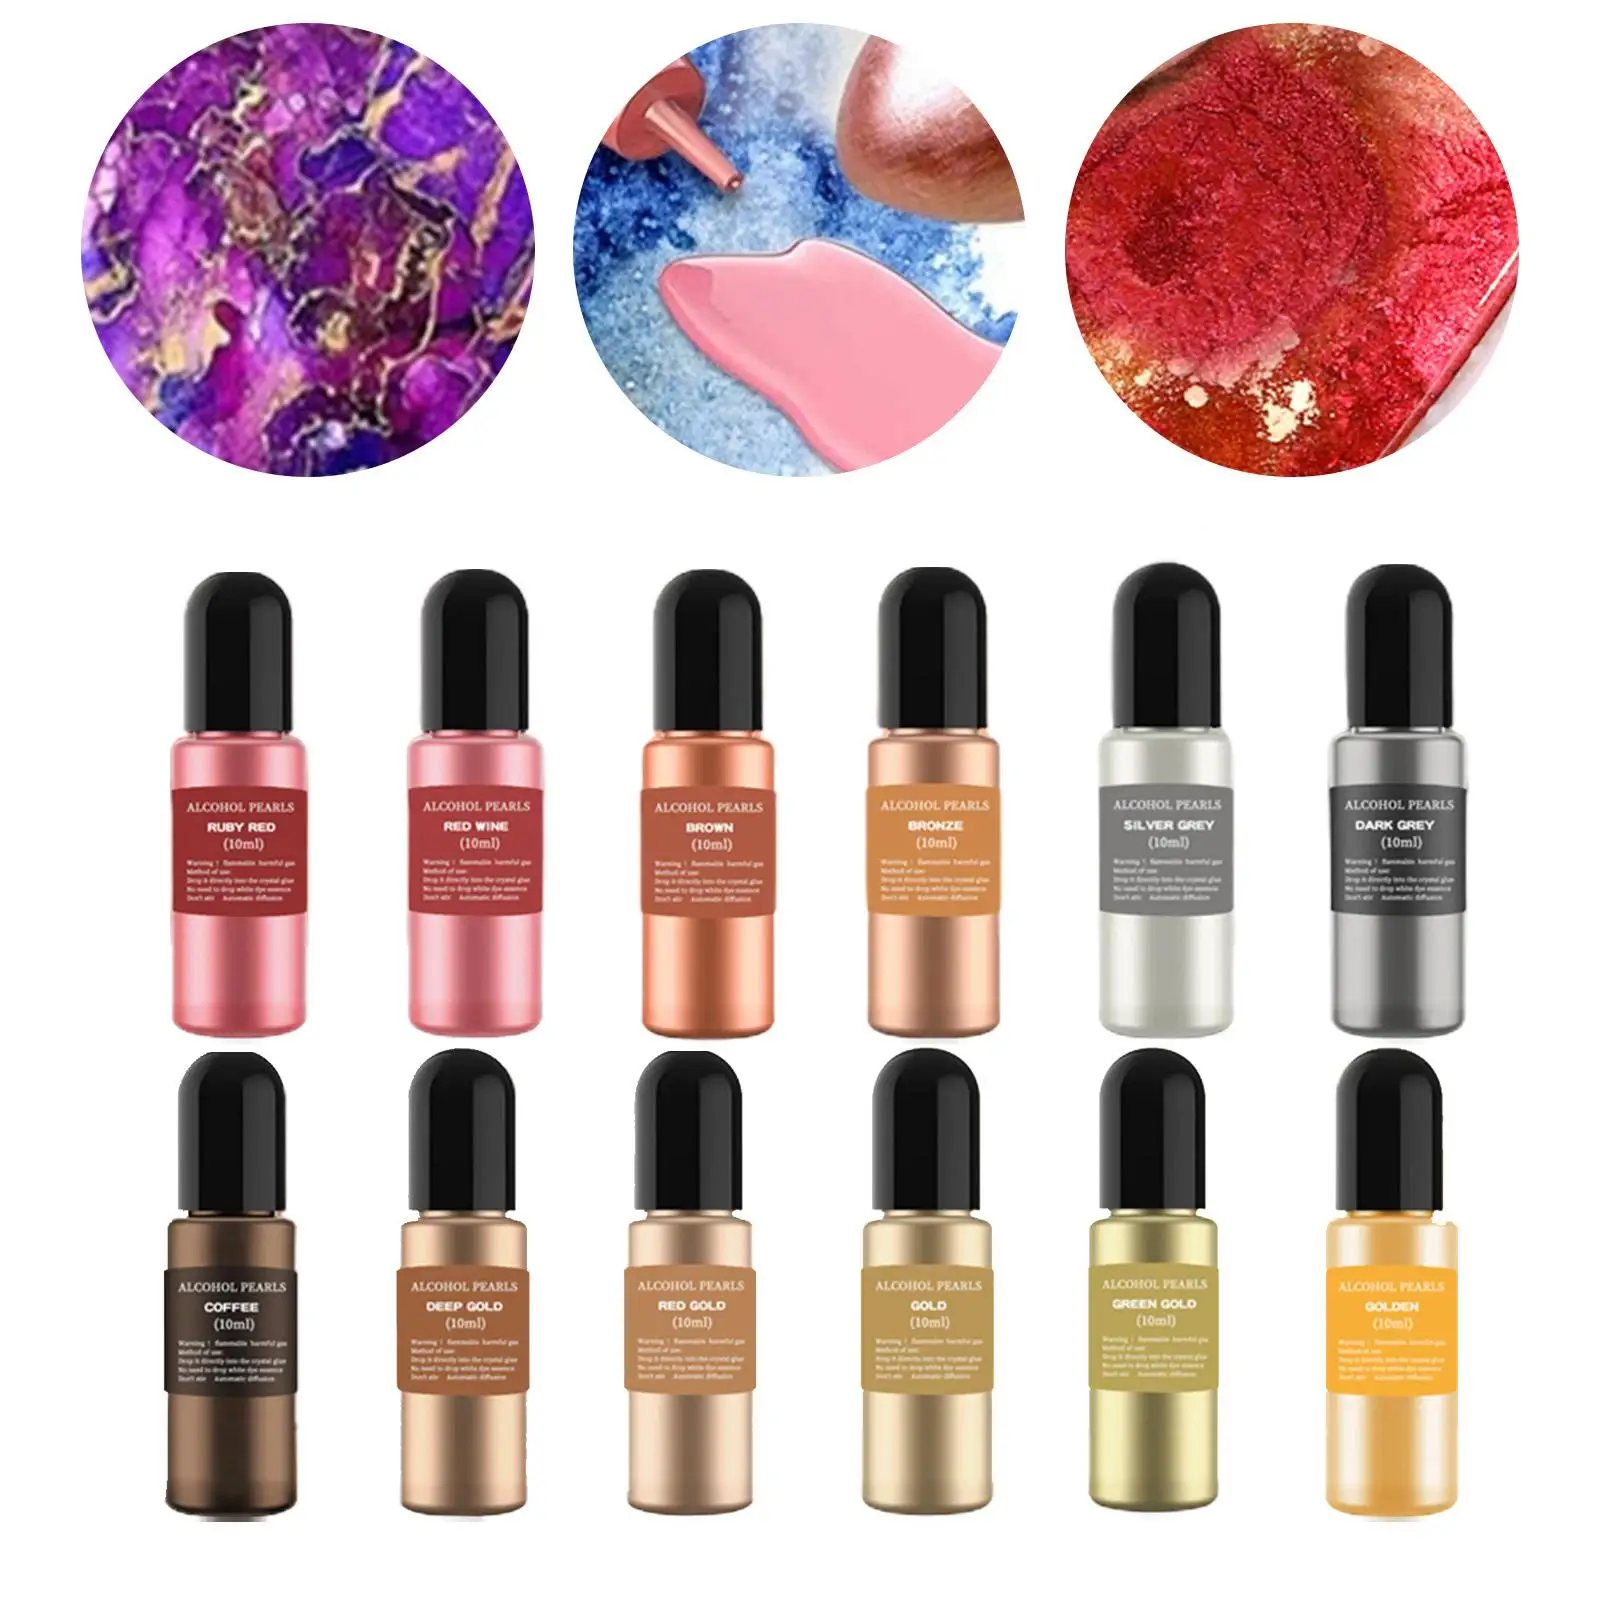 12 Vibrant Colors Metallic Inks Epoxy Resin Pigment Concentrated 10ml Each Resin Coloring Color Dye Tumbler Making